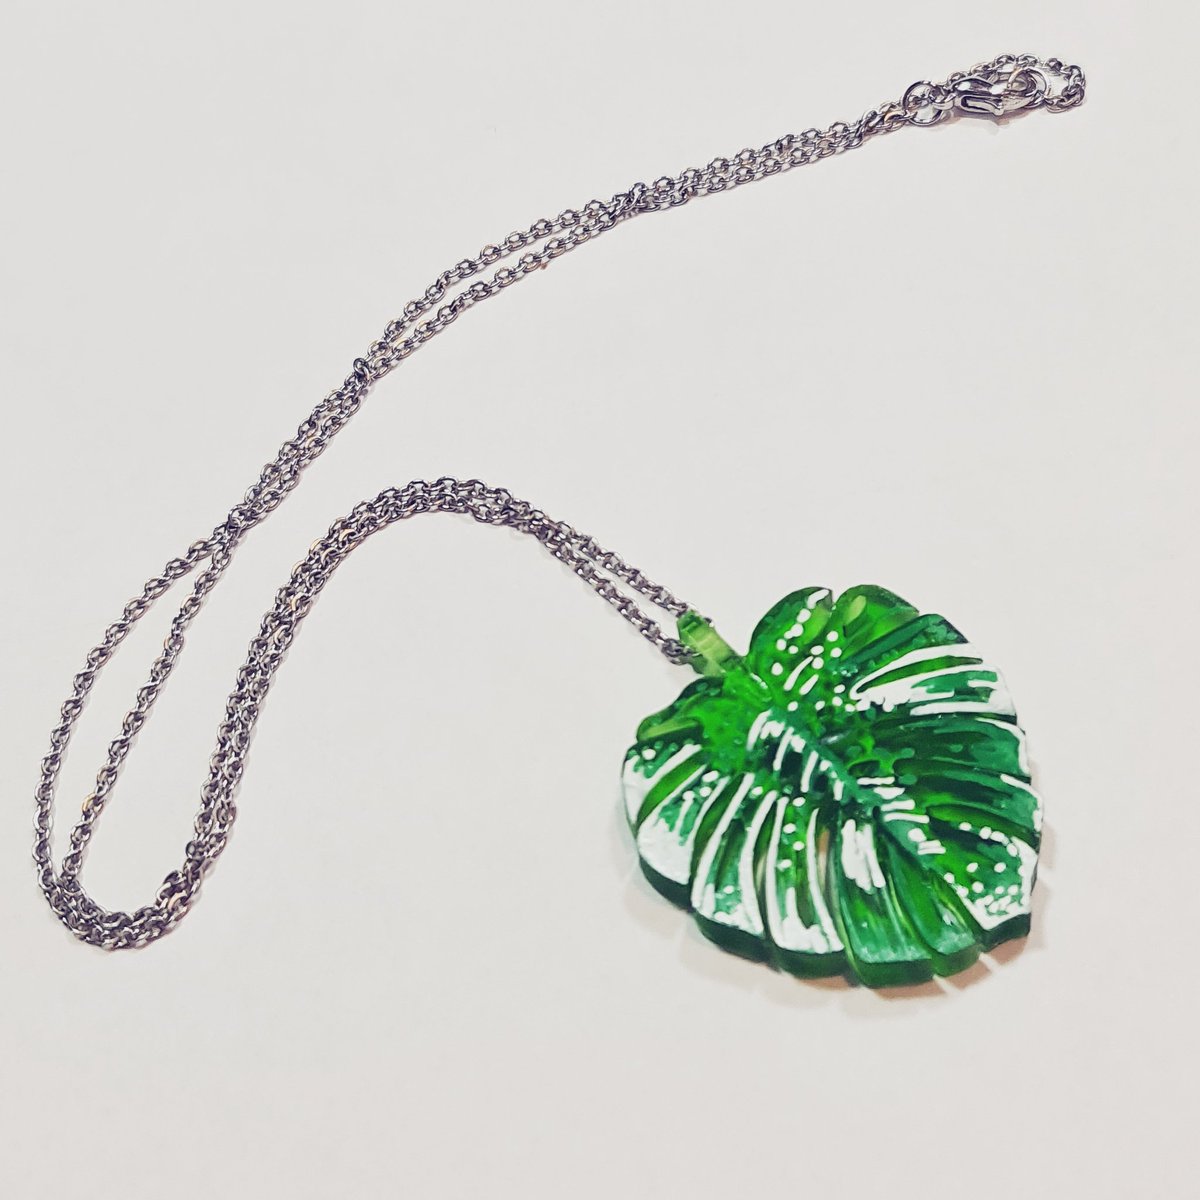 I love painting necklaces 🥰💞 Small order in between.

3D modeled, printed and painted by me

#monsteradeliciosa #monstera #monsteravariegata #monsteravarigata #plant #necklace #necklaces #handmade #merchandise #selfmade #jewellery #jewellerydesign